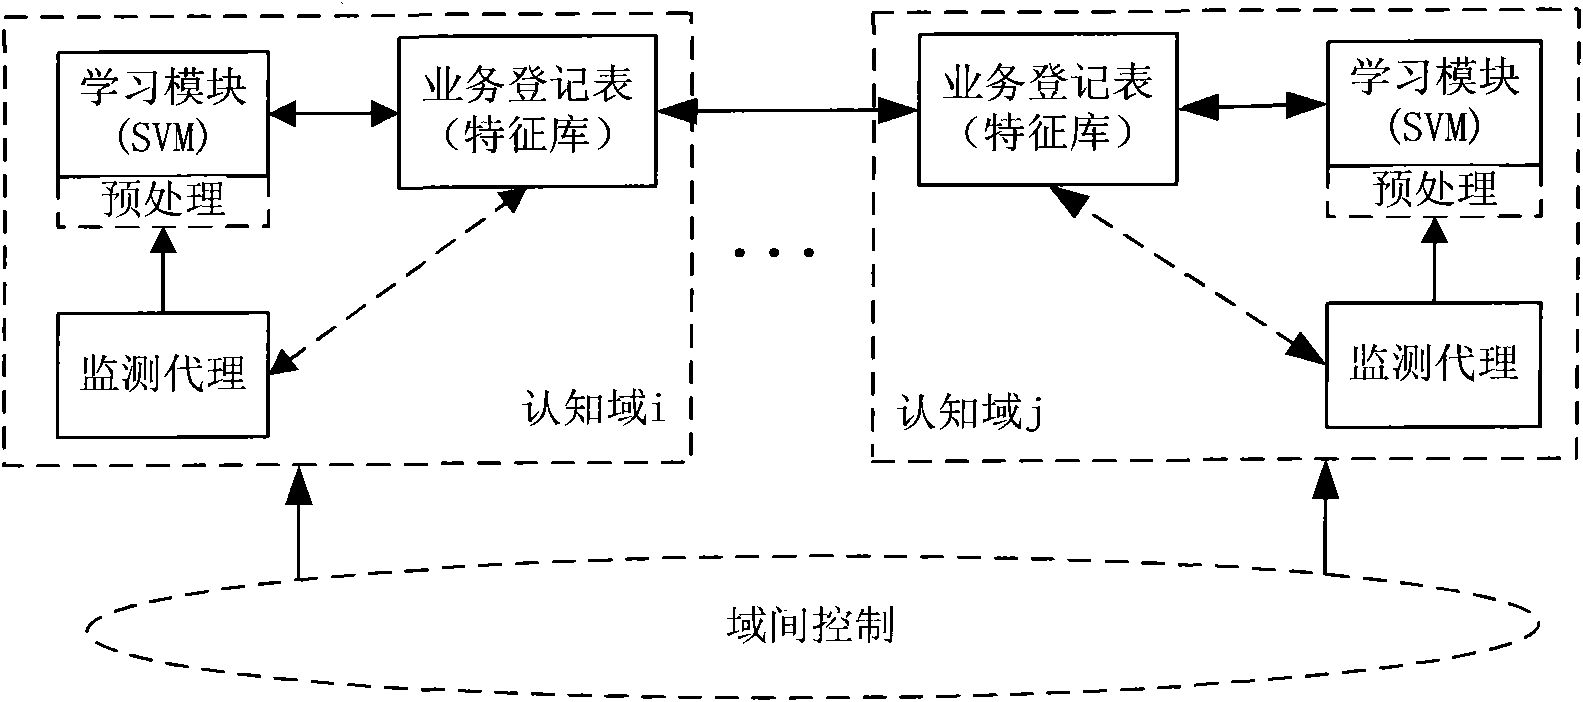 Service awareness method based on distributed monitoring and management structure